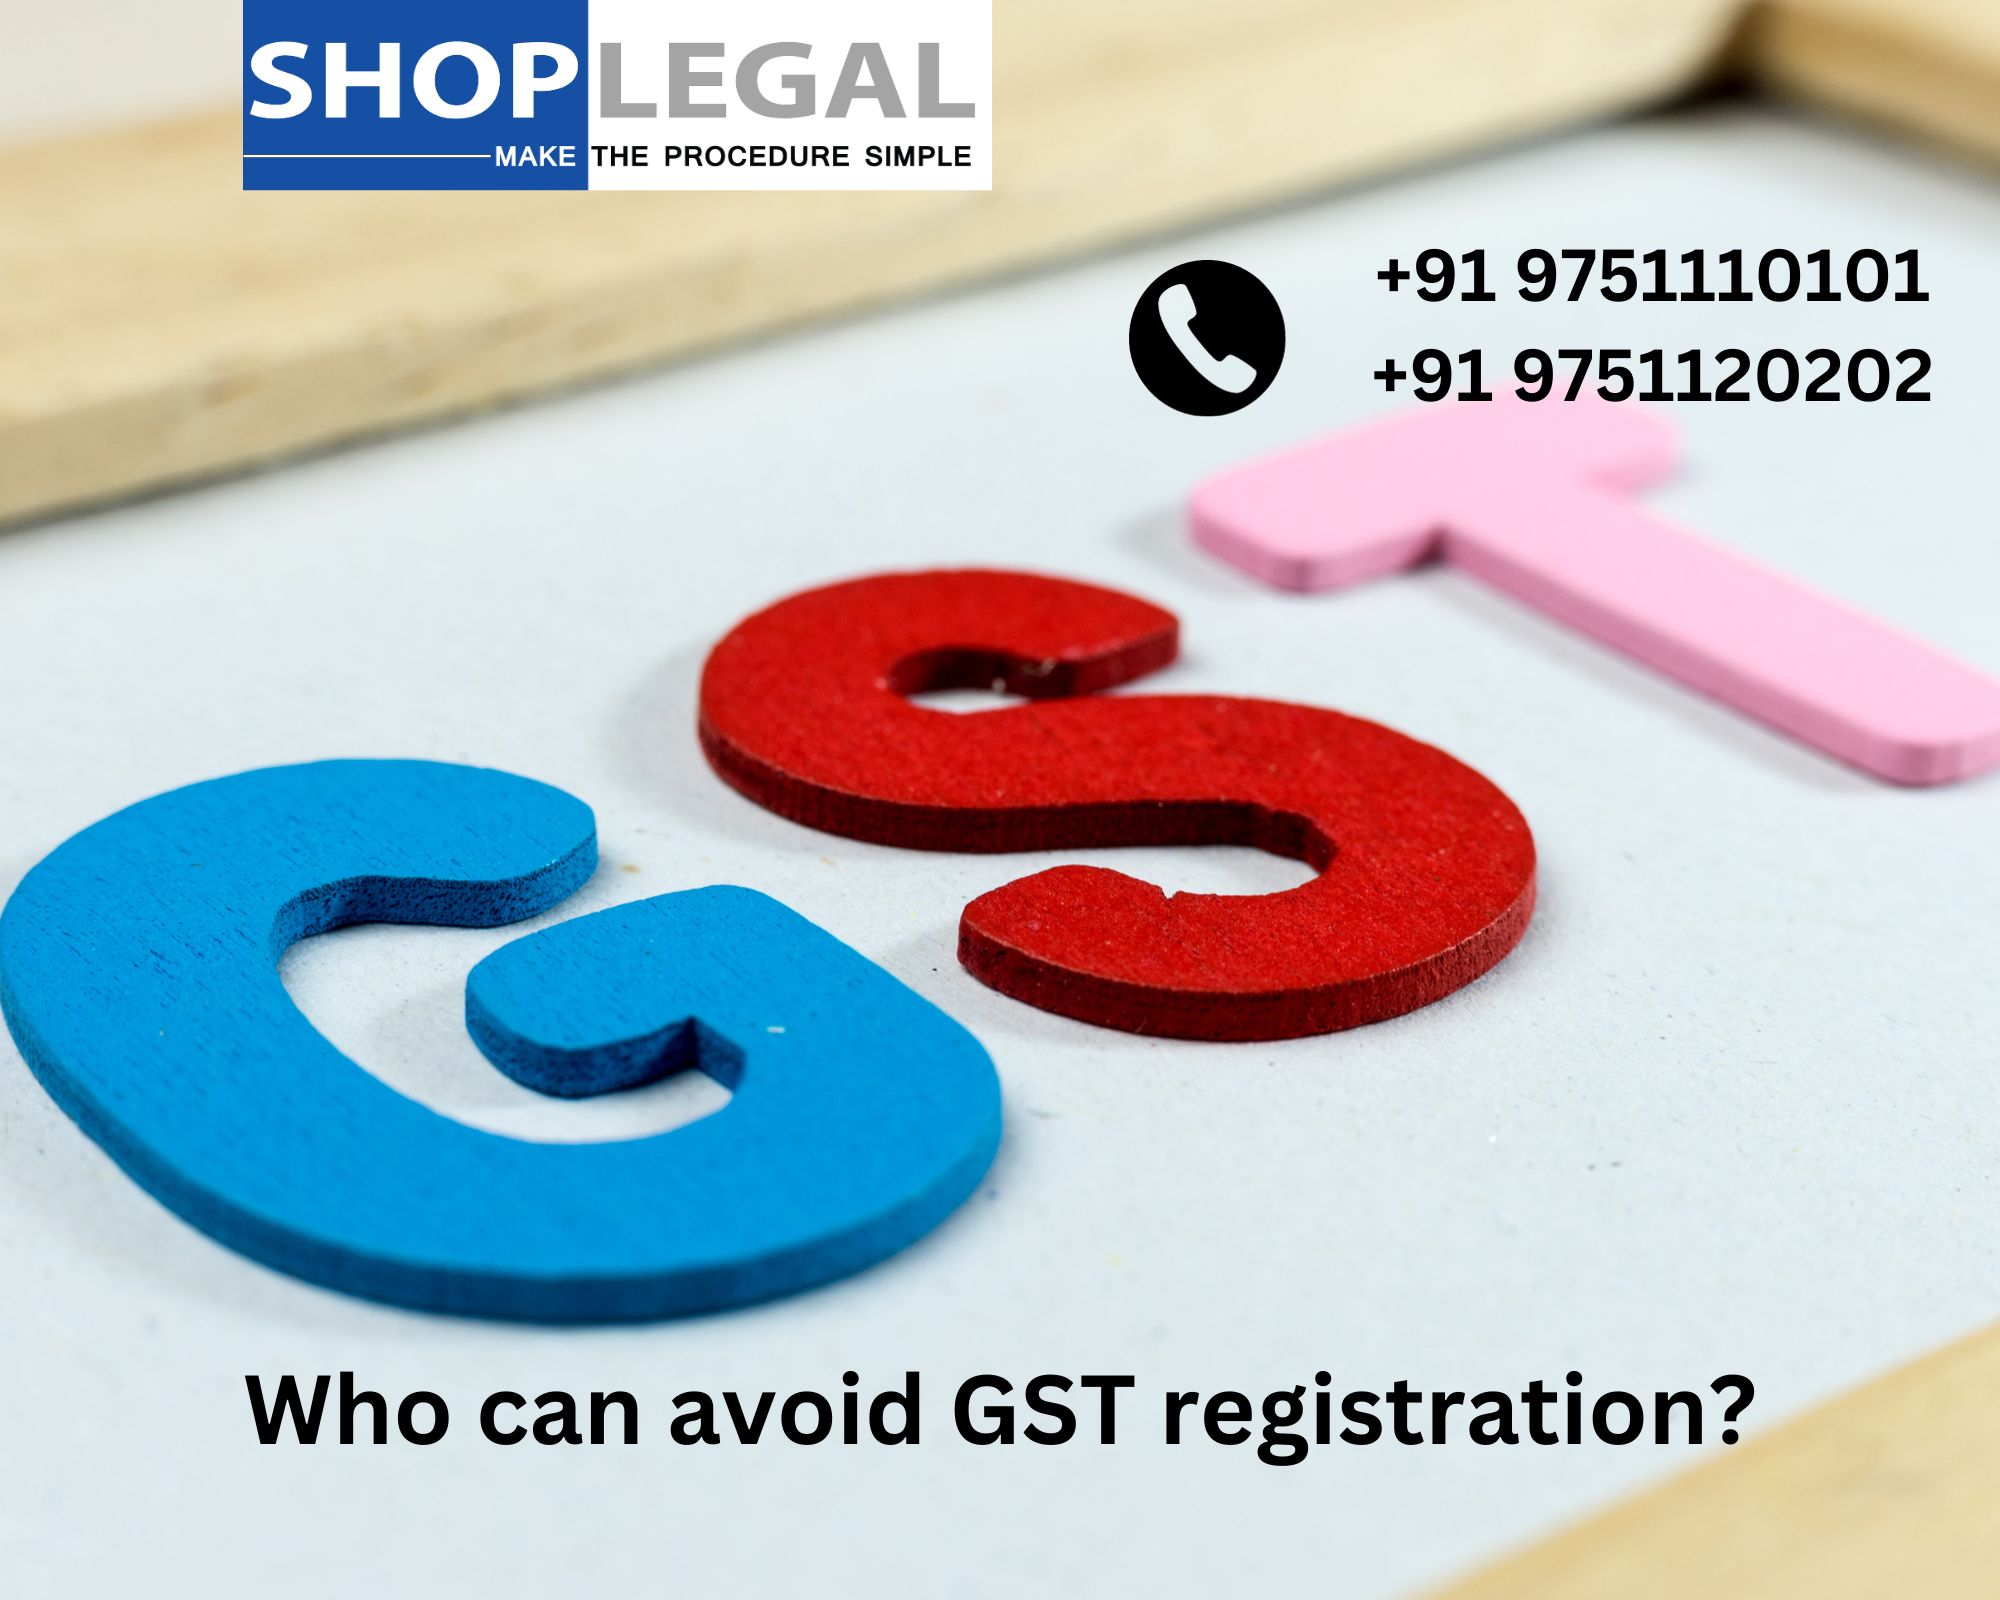 Who can avoid GST registration?